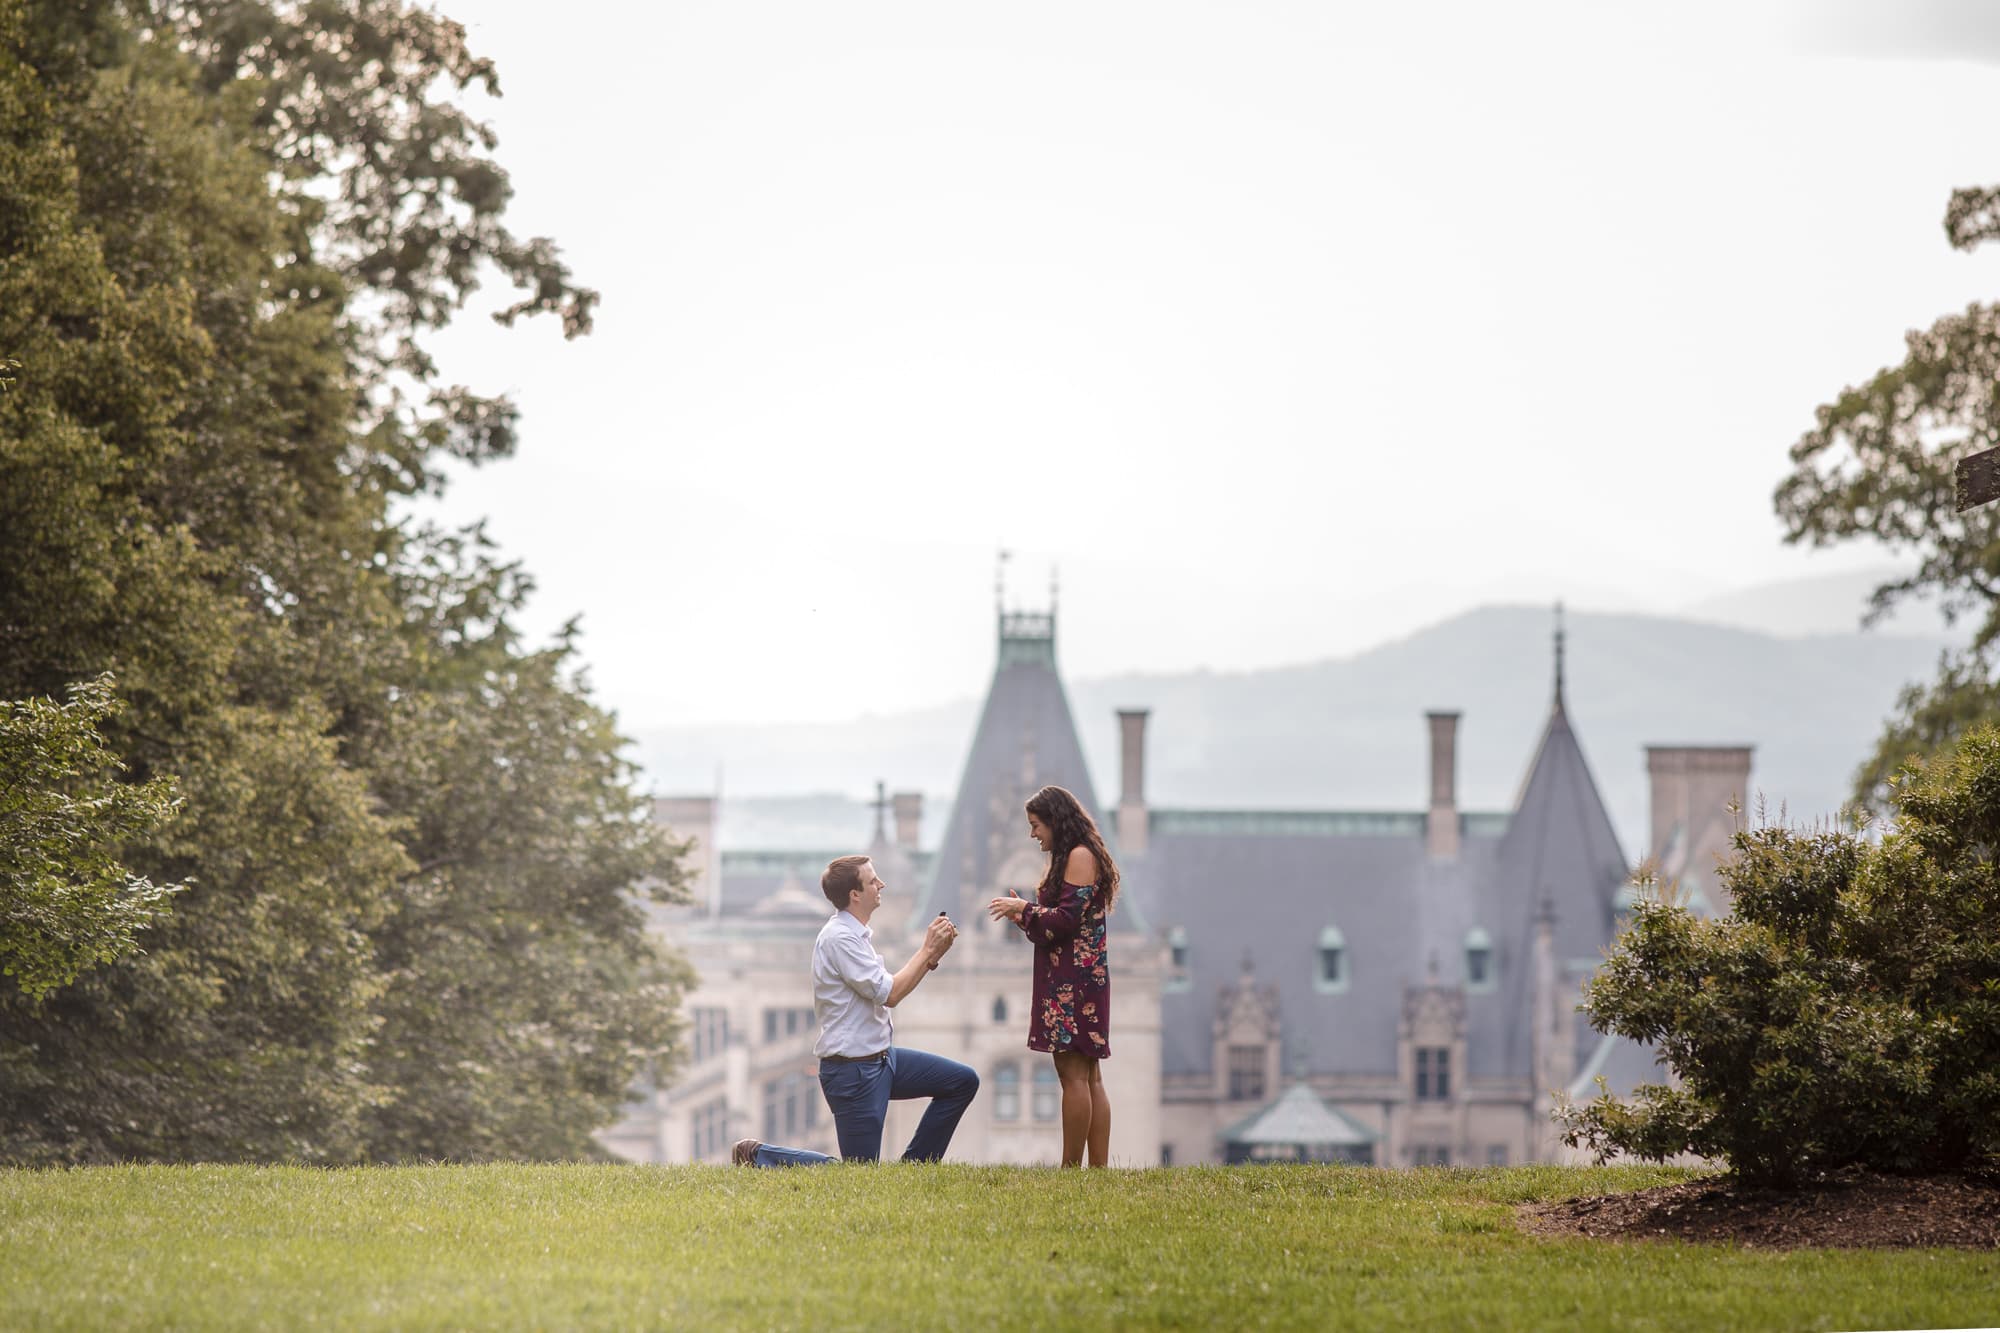 Man proposing to woman in front of Biltmore Estate North Carolina photography done by Kathy Beaver.